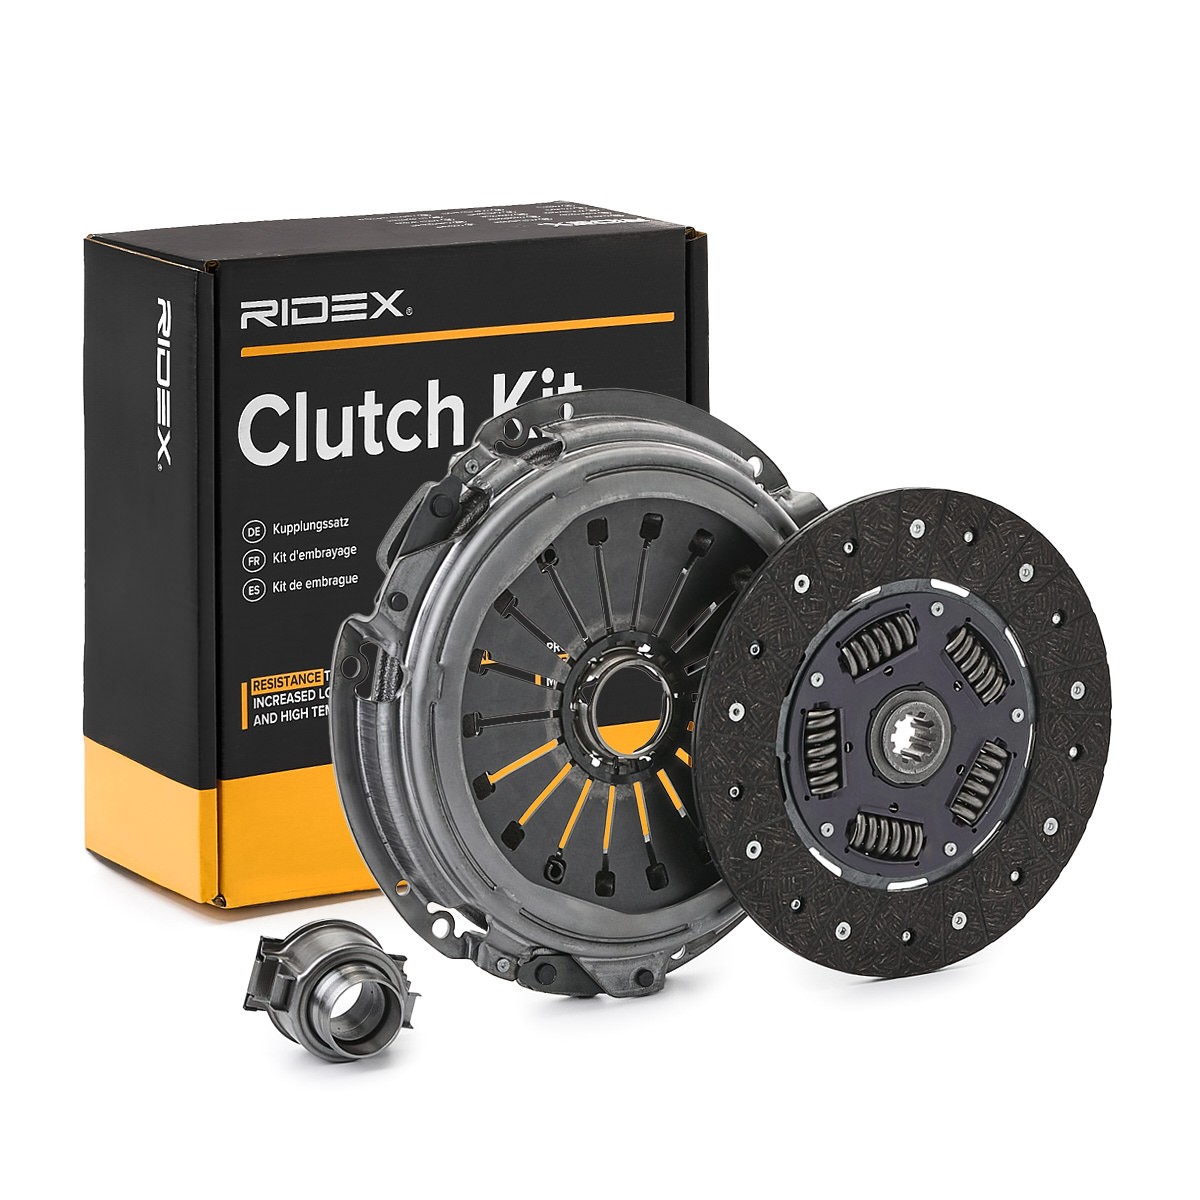 RIDEX 479C0644 Clutch kit for engines with dual-mass flywheel, with clutch pressure plate, with clutch disc, with clutch release bearing, Check and replace dual-mass flywheel if necessary., 270mm